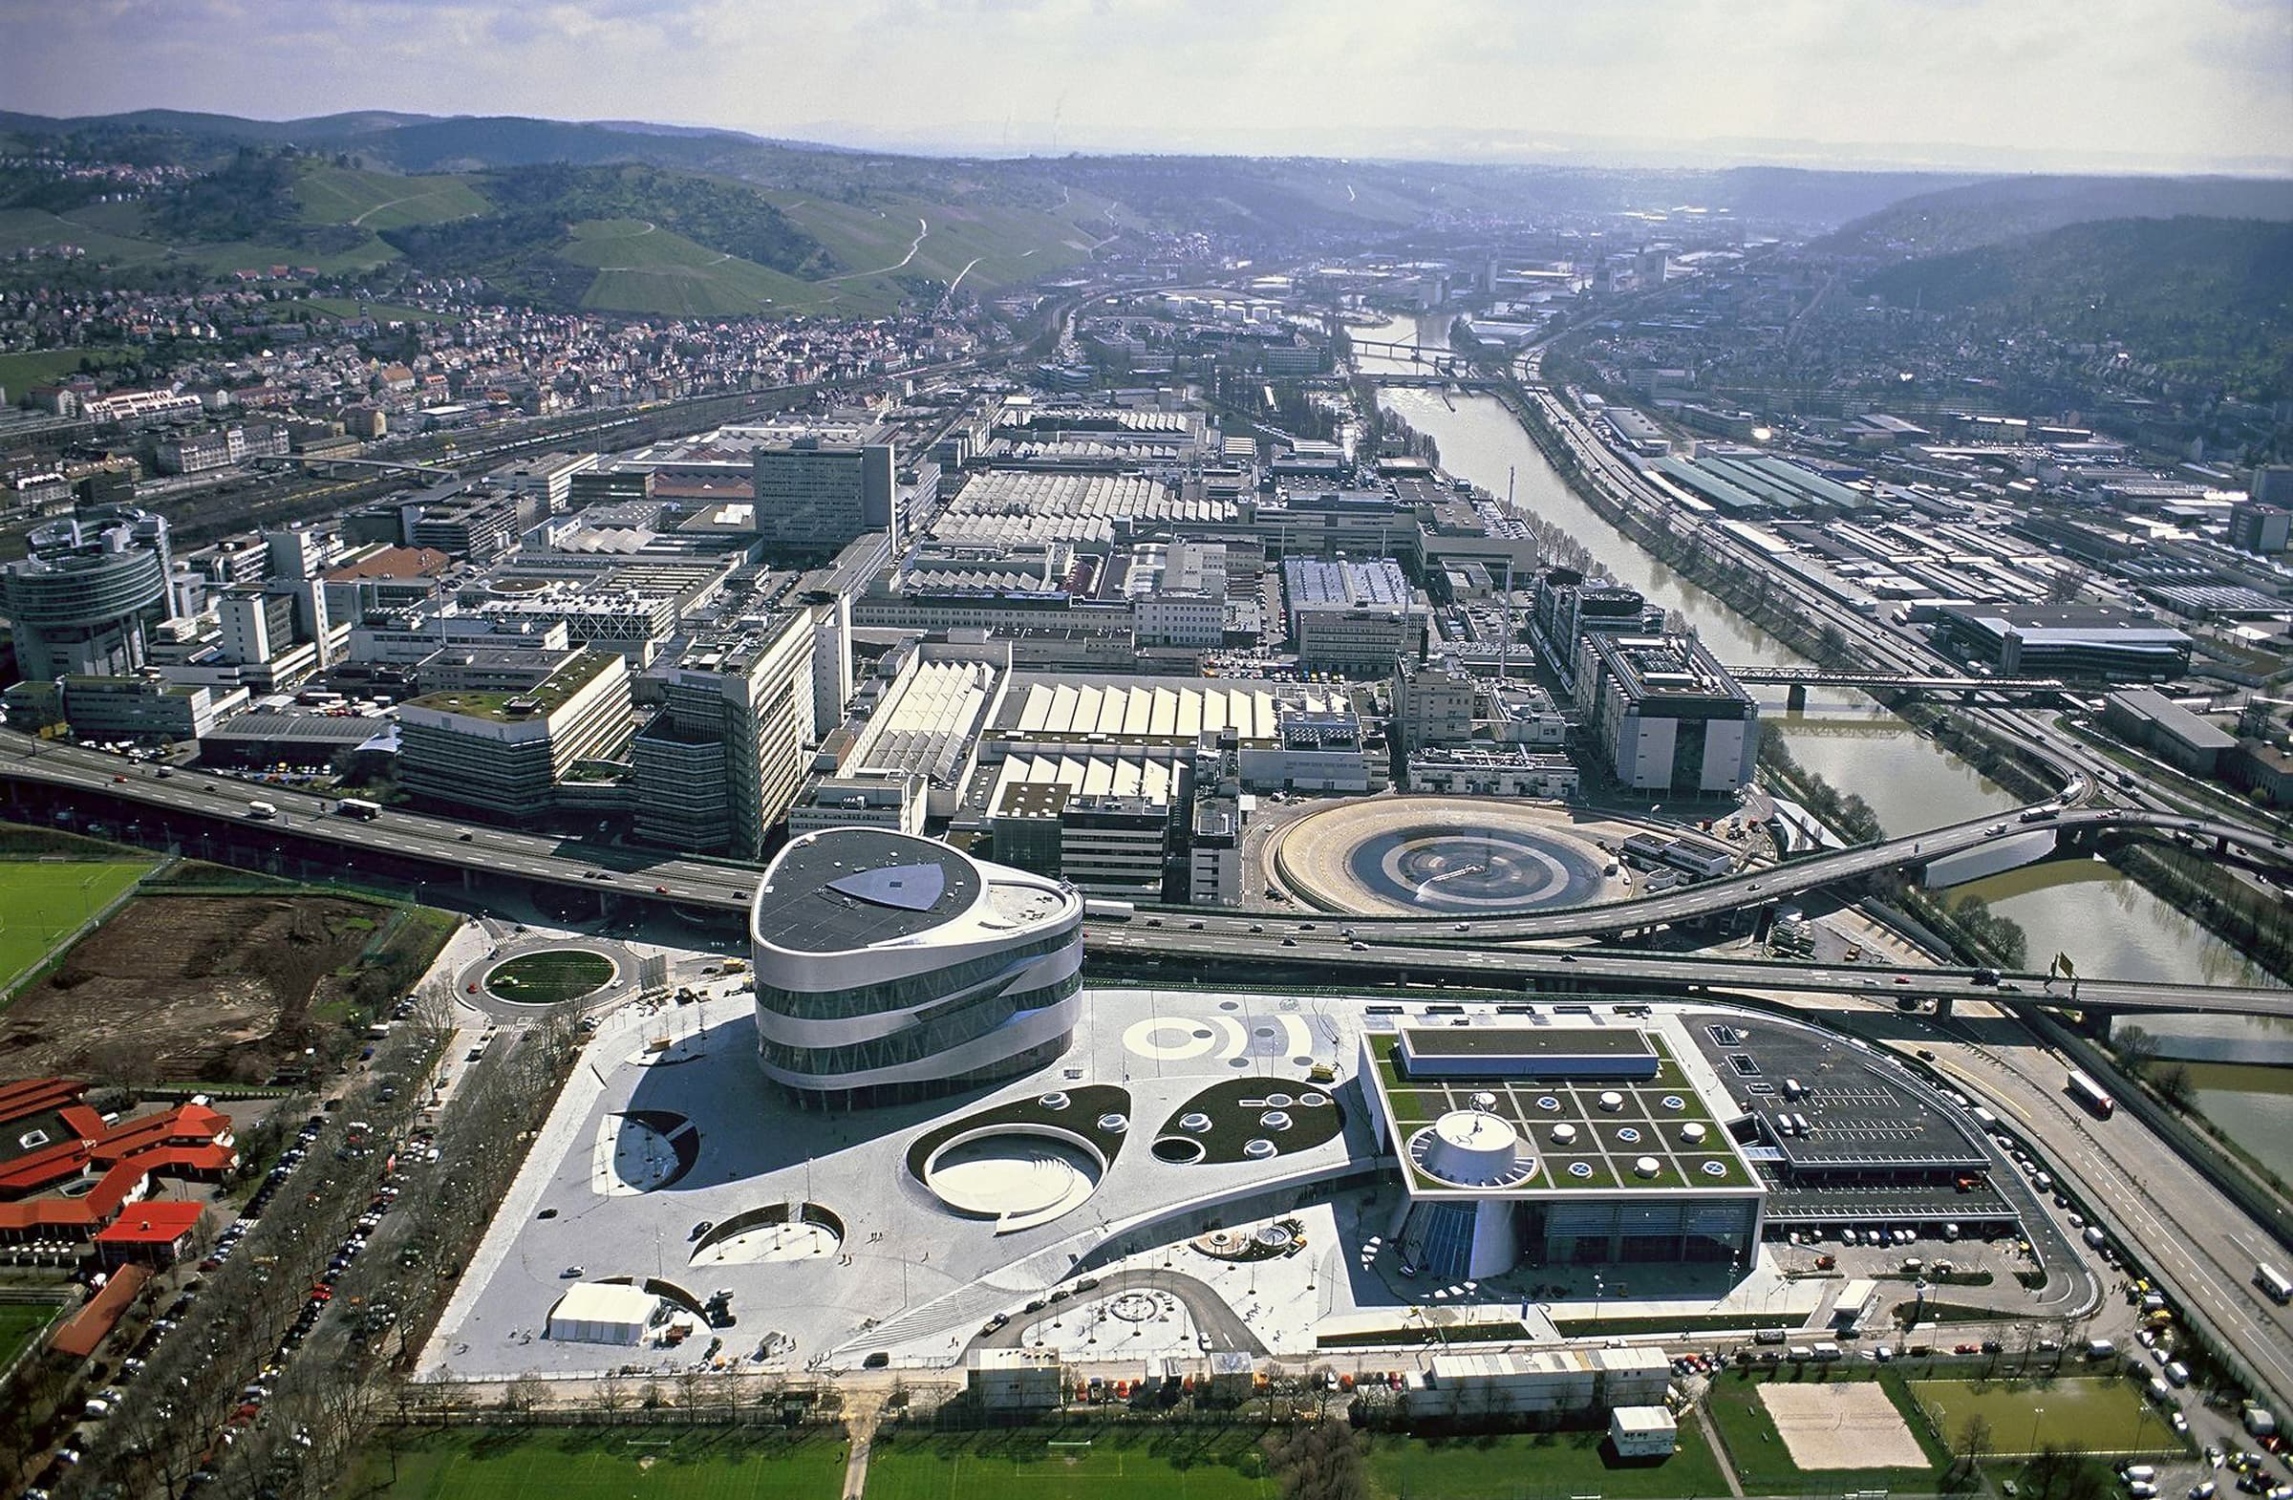 Aerial photograph of the Mercedes Benz Campus.